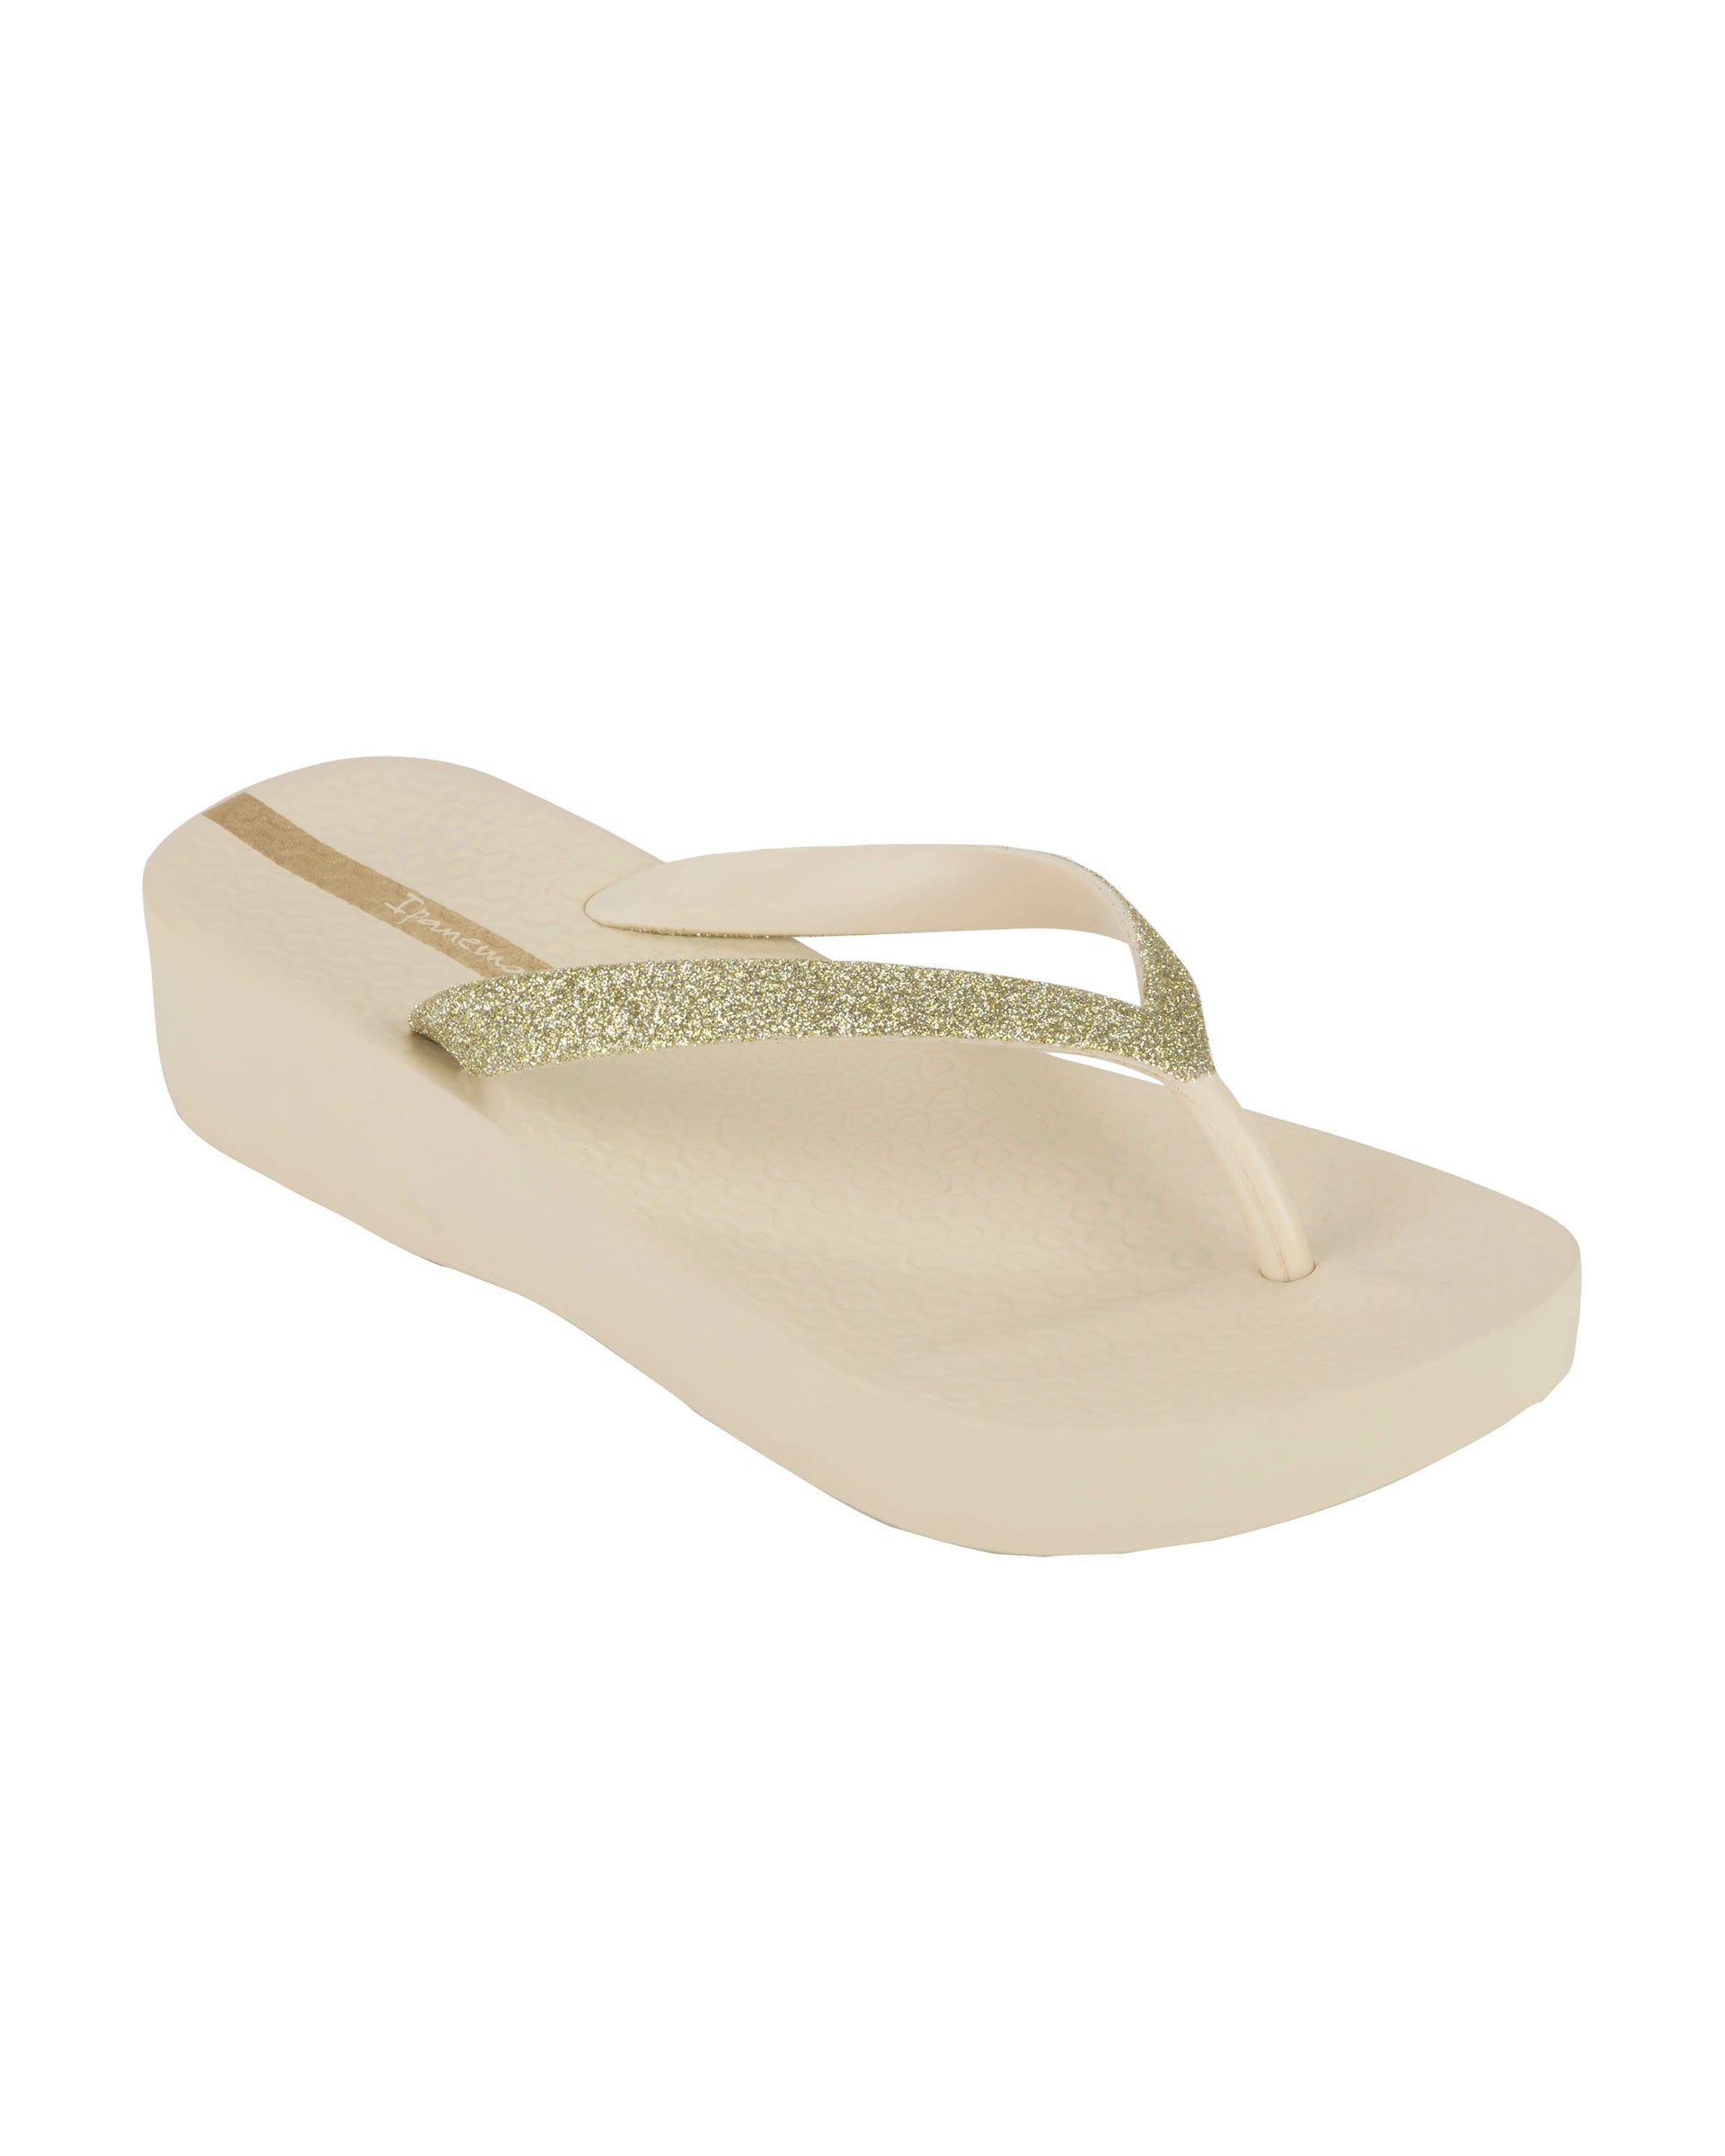 Angled view of a beige Ipanema Mesh Chic women's wedge flip flop with glitter gold straps.